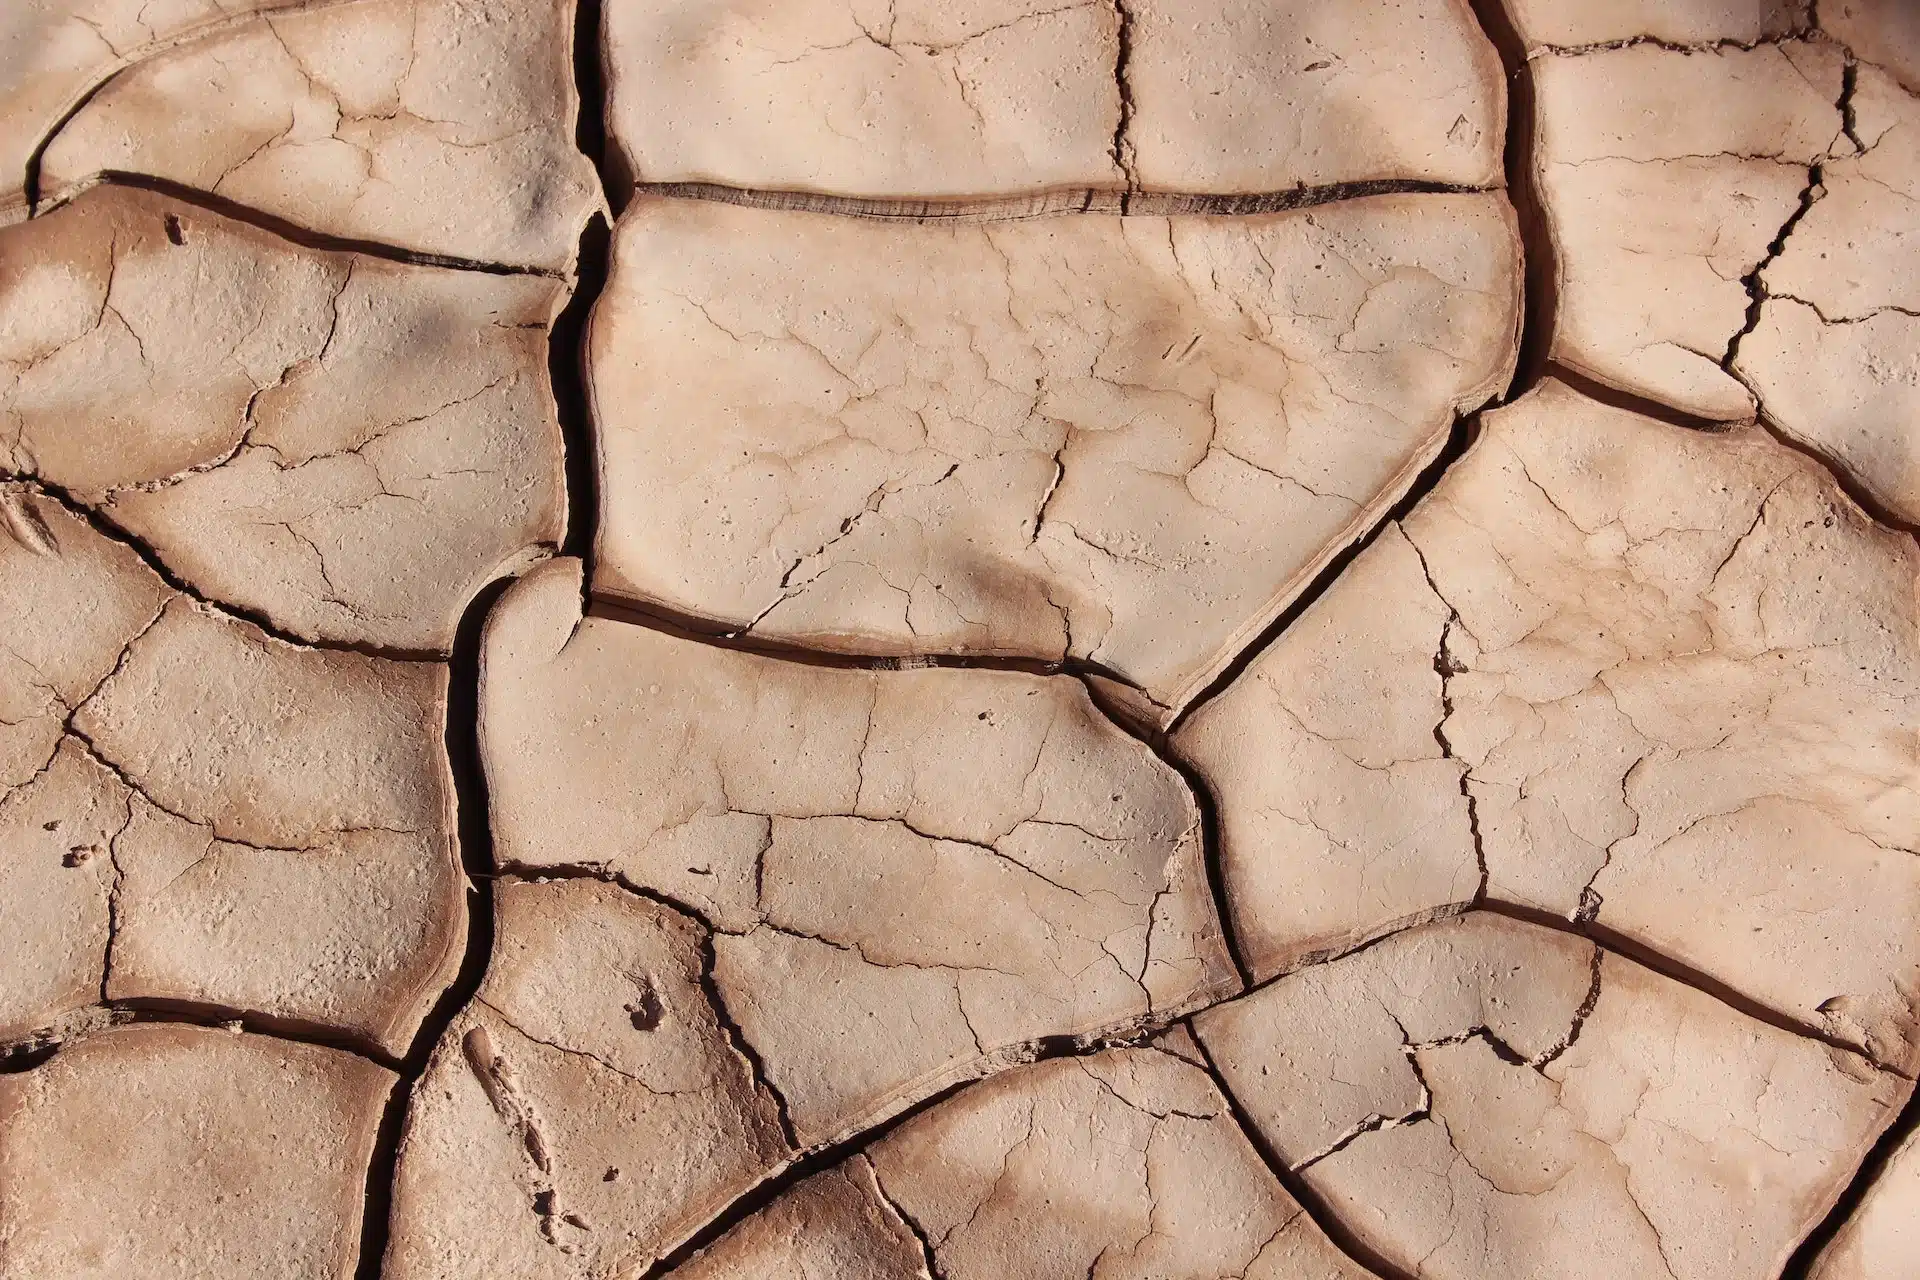 A desert floor showing dryness and cracks in the sand